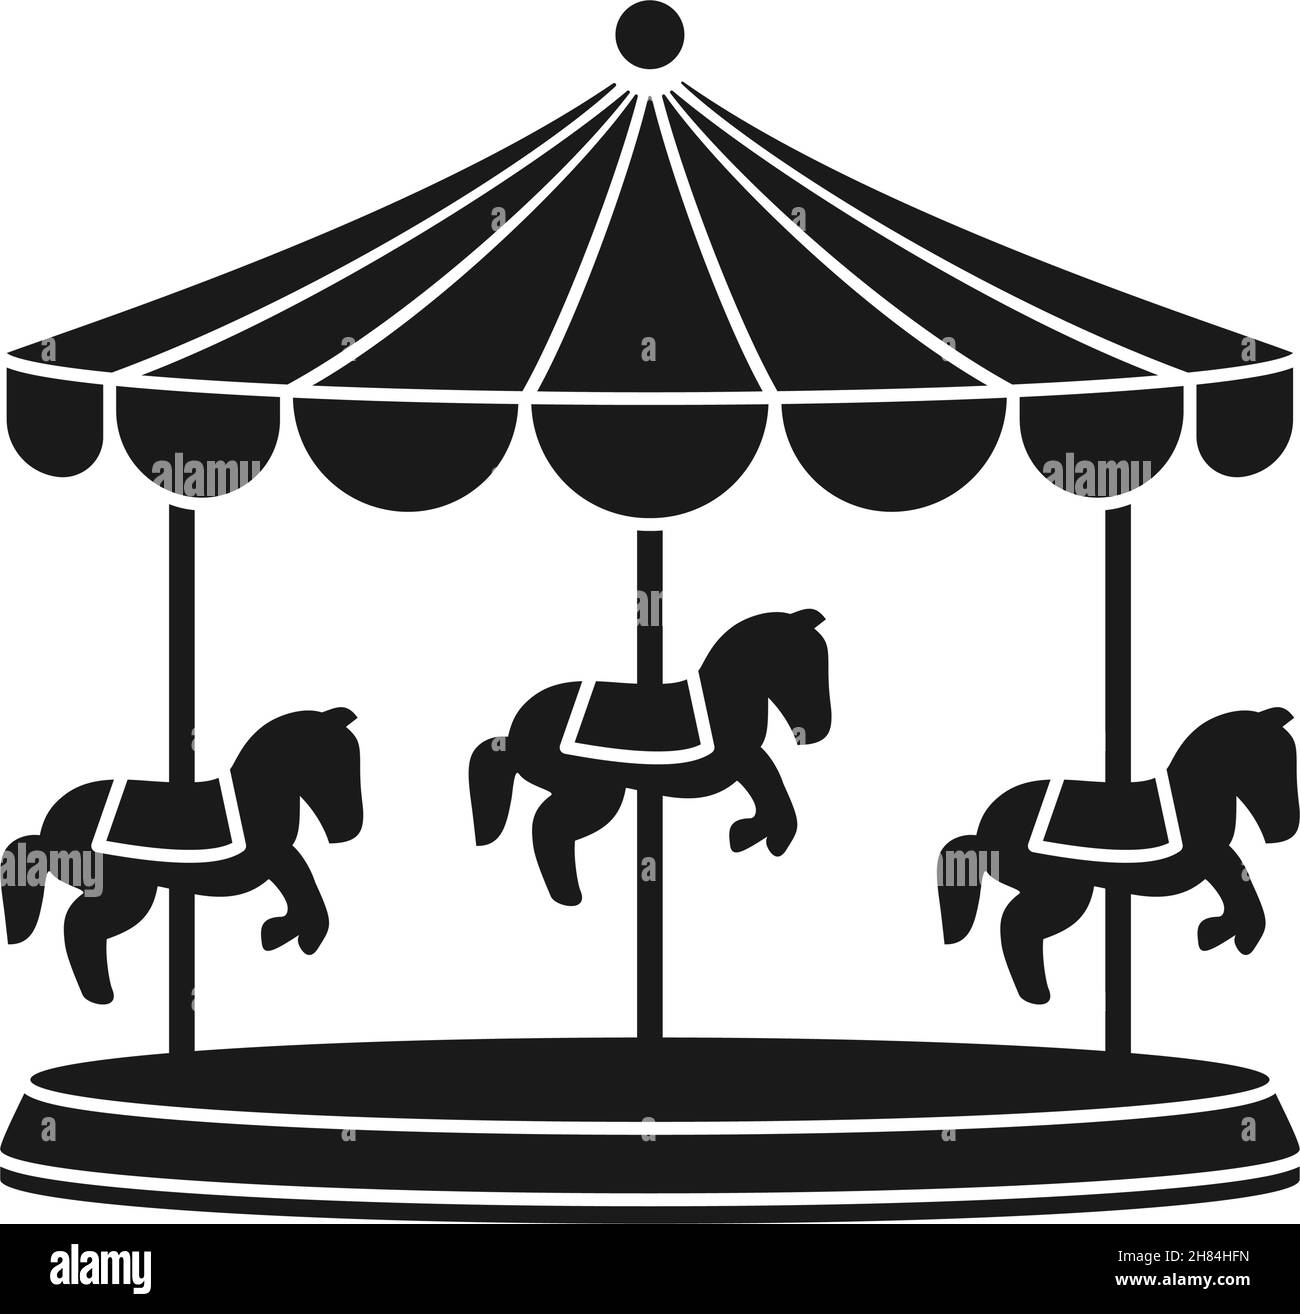 Carousel or merry-go-round with carousel horses for amusement ride in silhouette vector icon Stock Vector